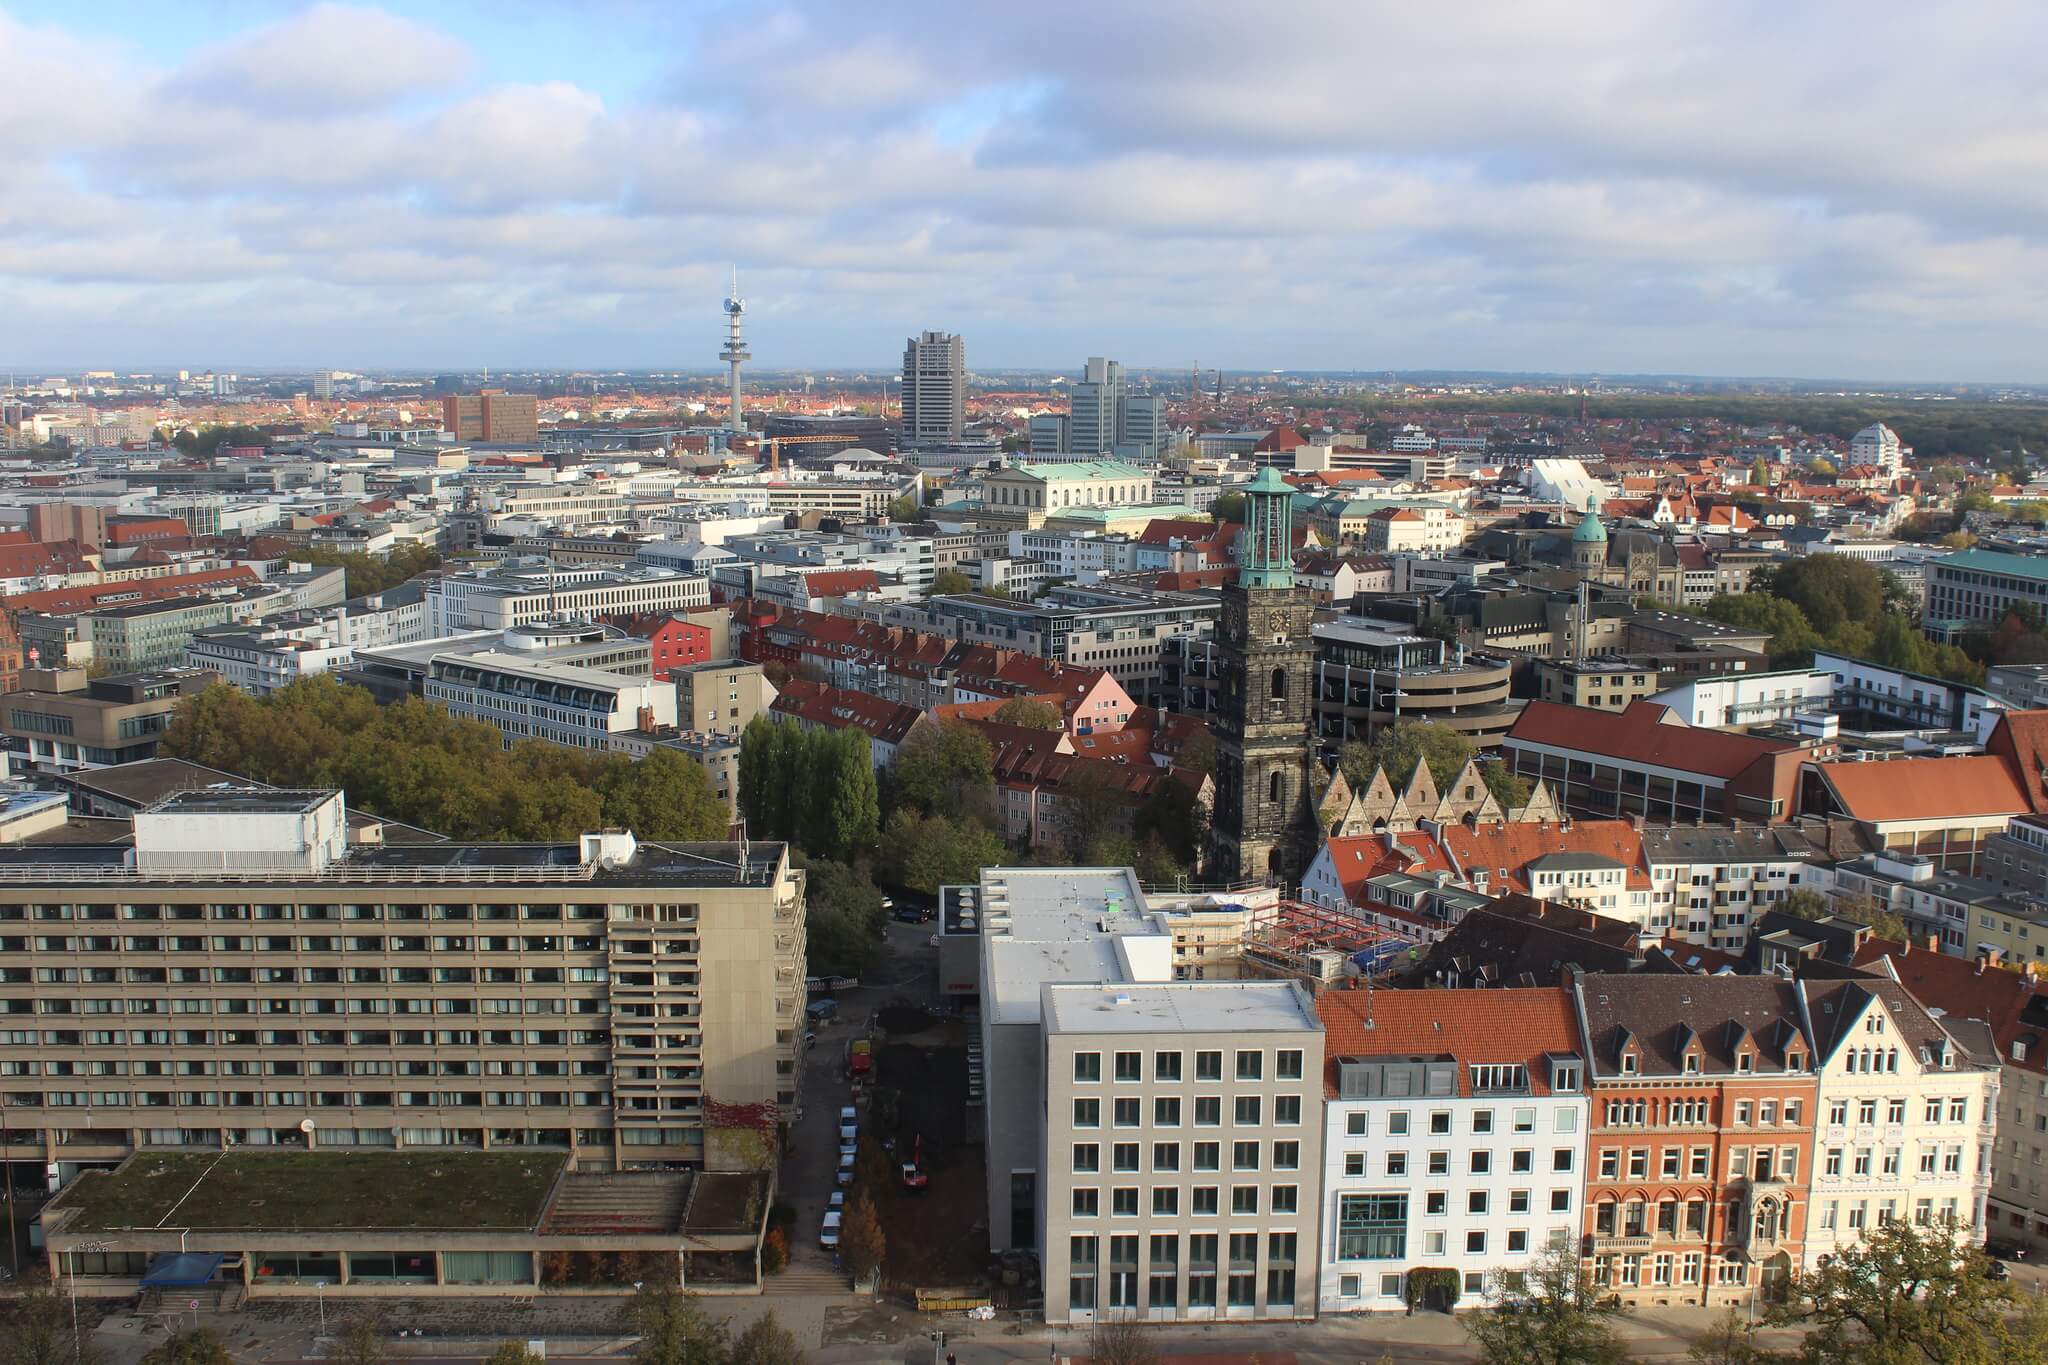 Hanovra seen from the tower of the New Cityhall, Germany